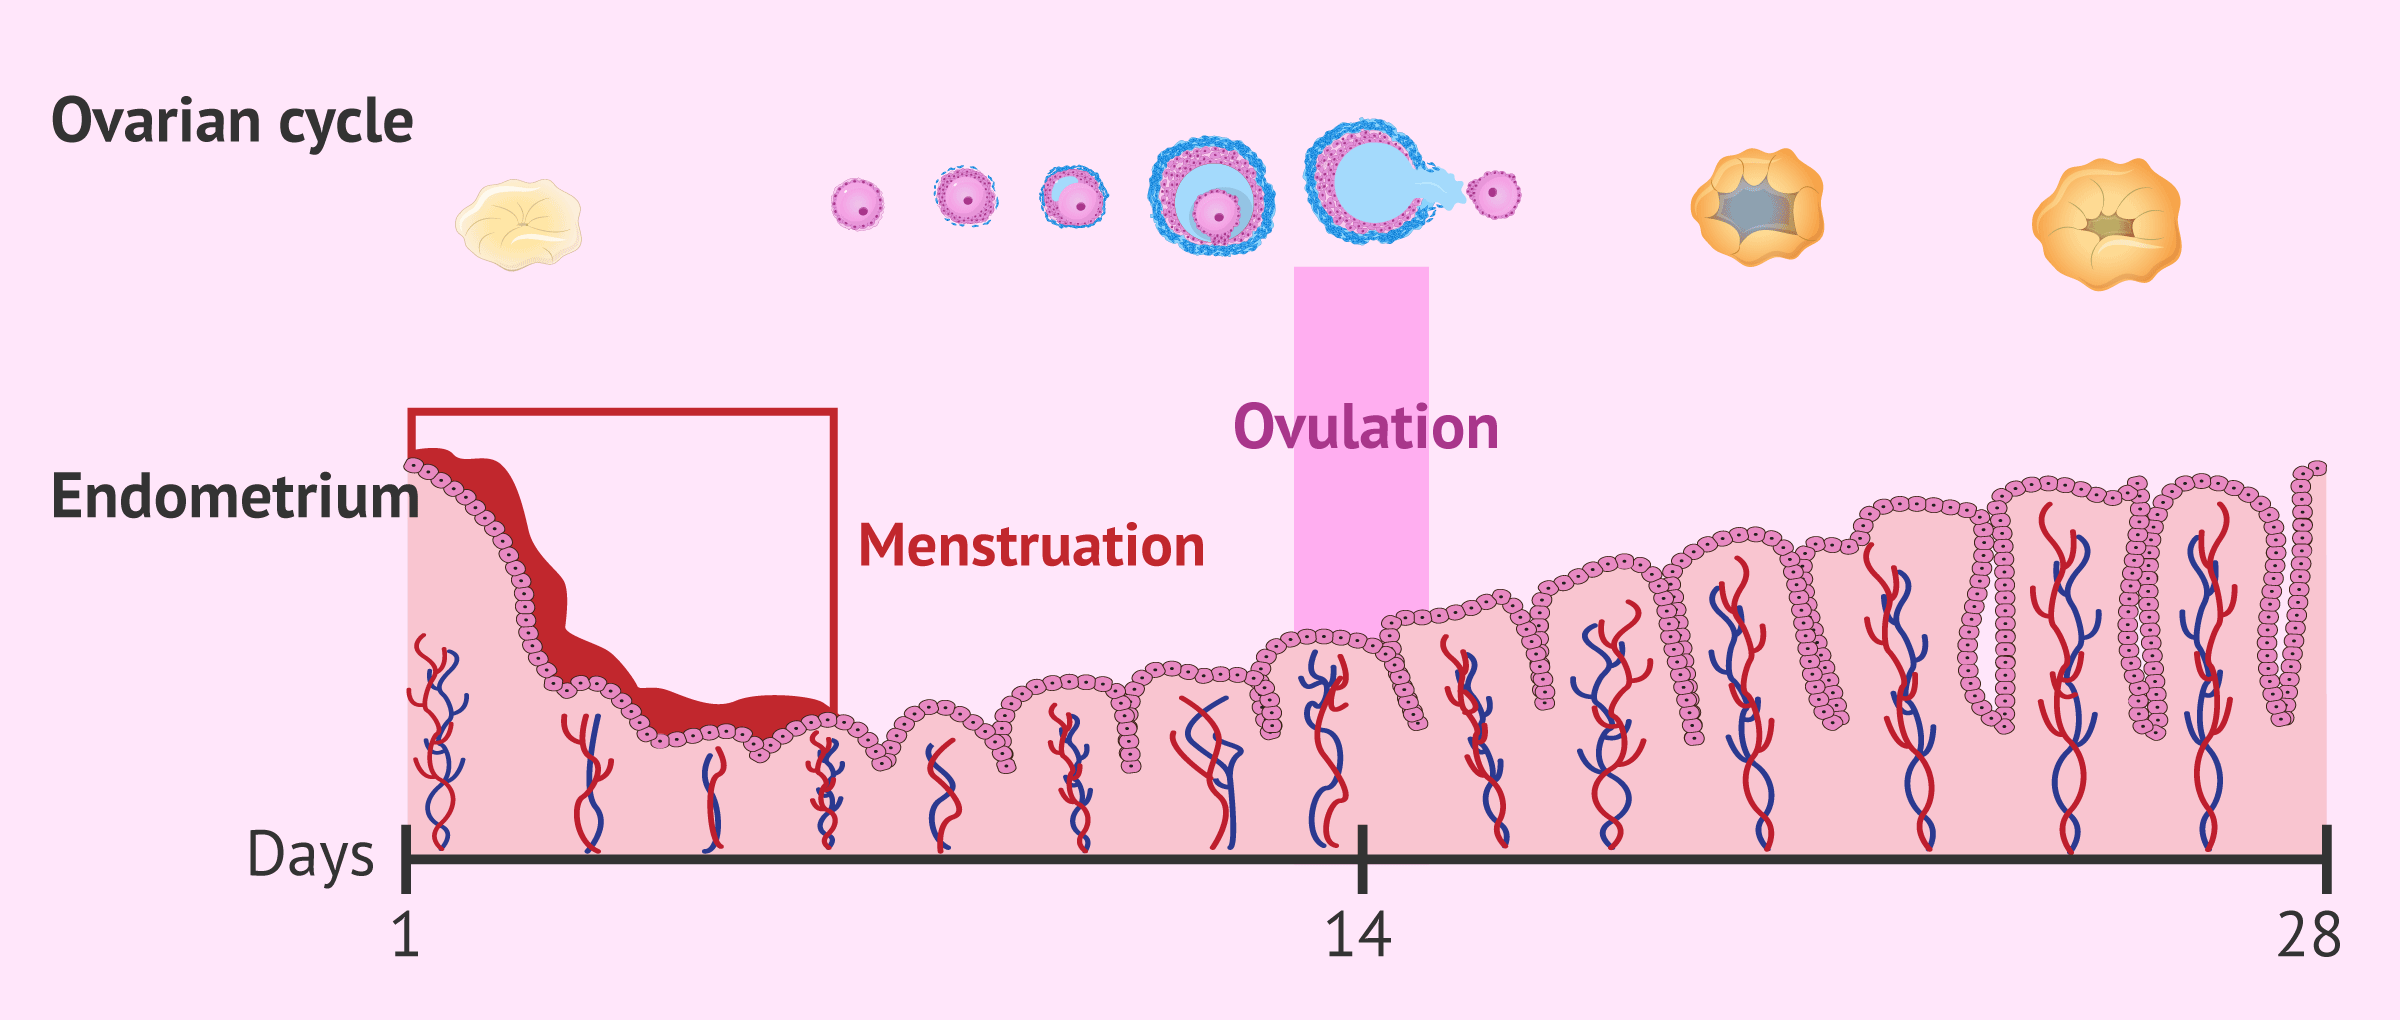 Ovulation and menstruation at the same time